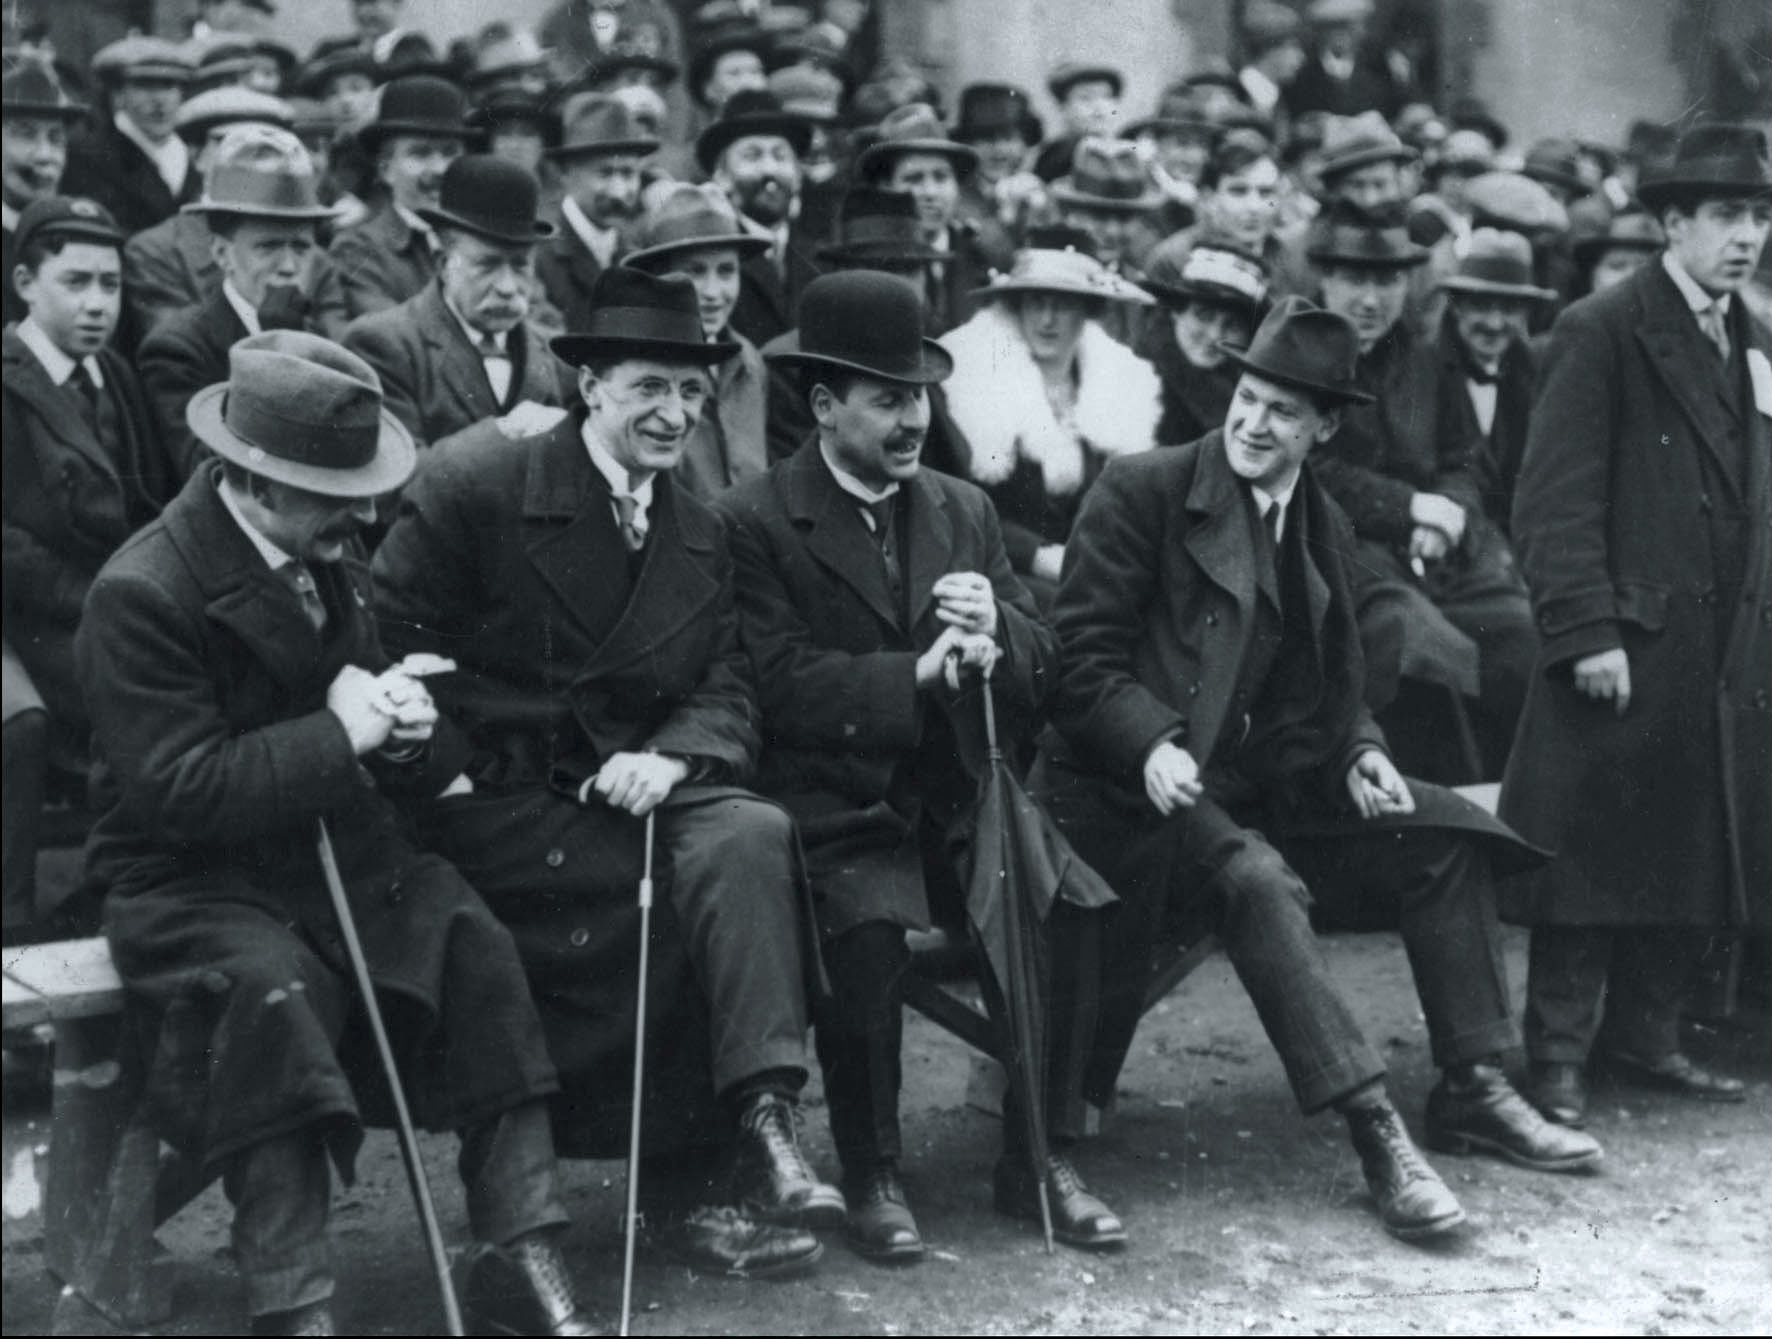 From left, Arthur Griffith, Eamon de Valera, Laurence O’Neill, and Collins at Croke Park, 1921.